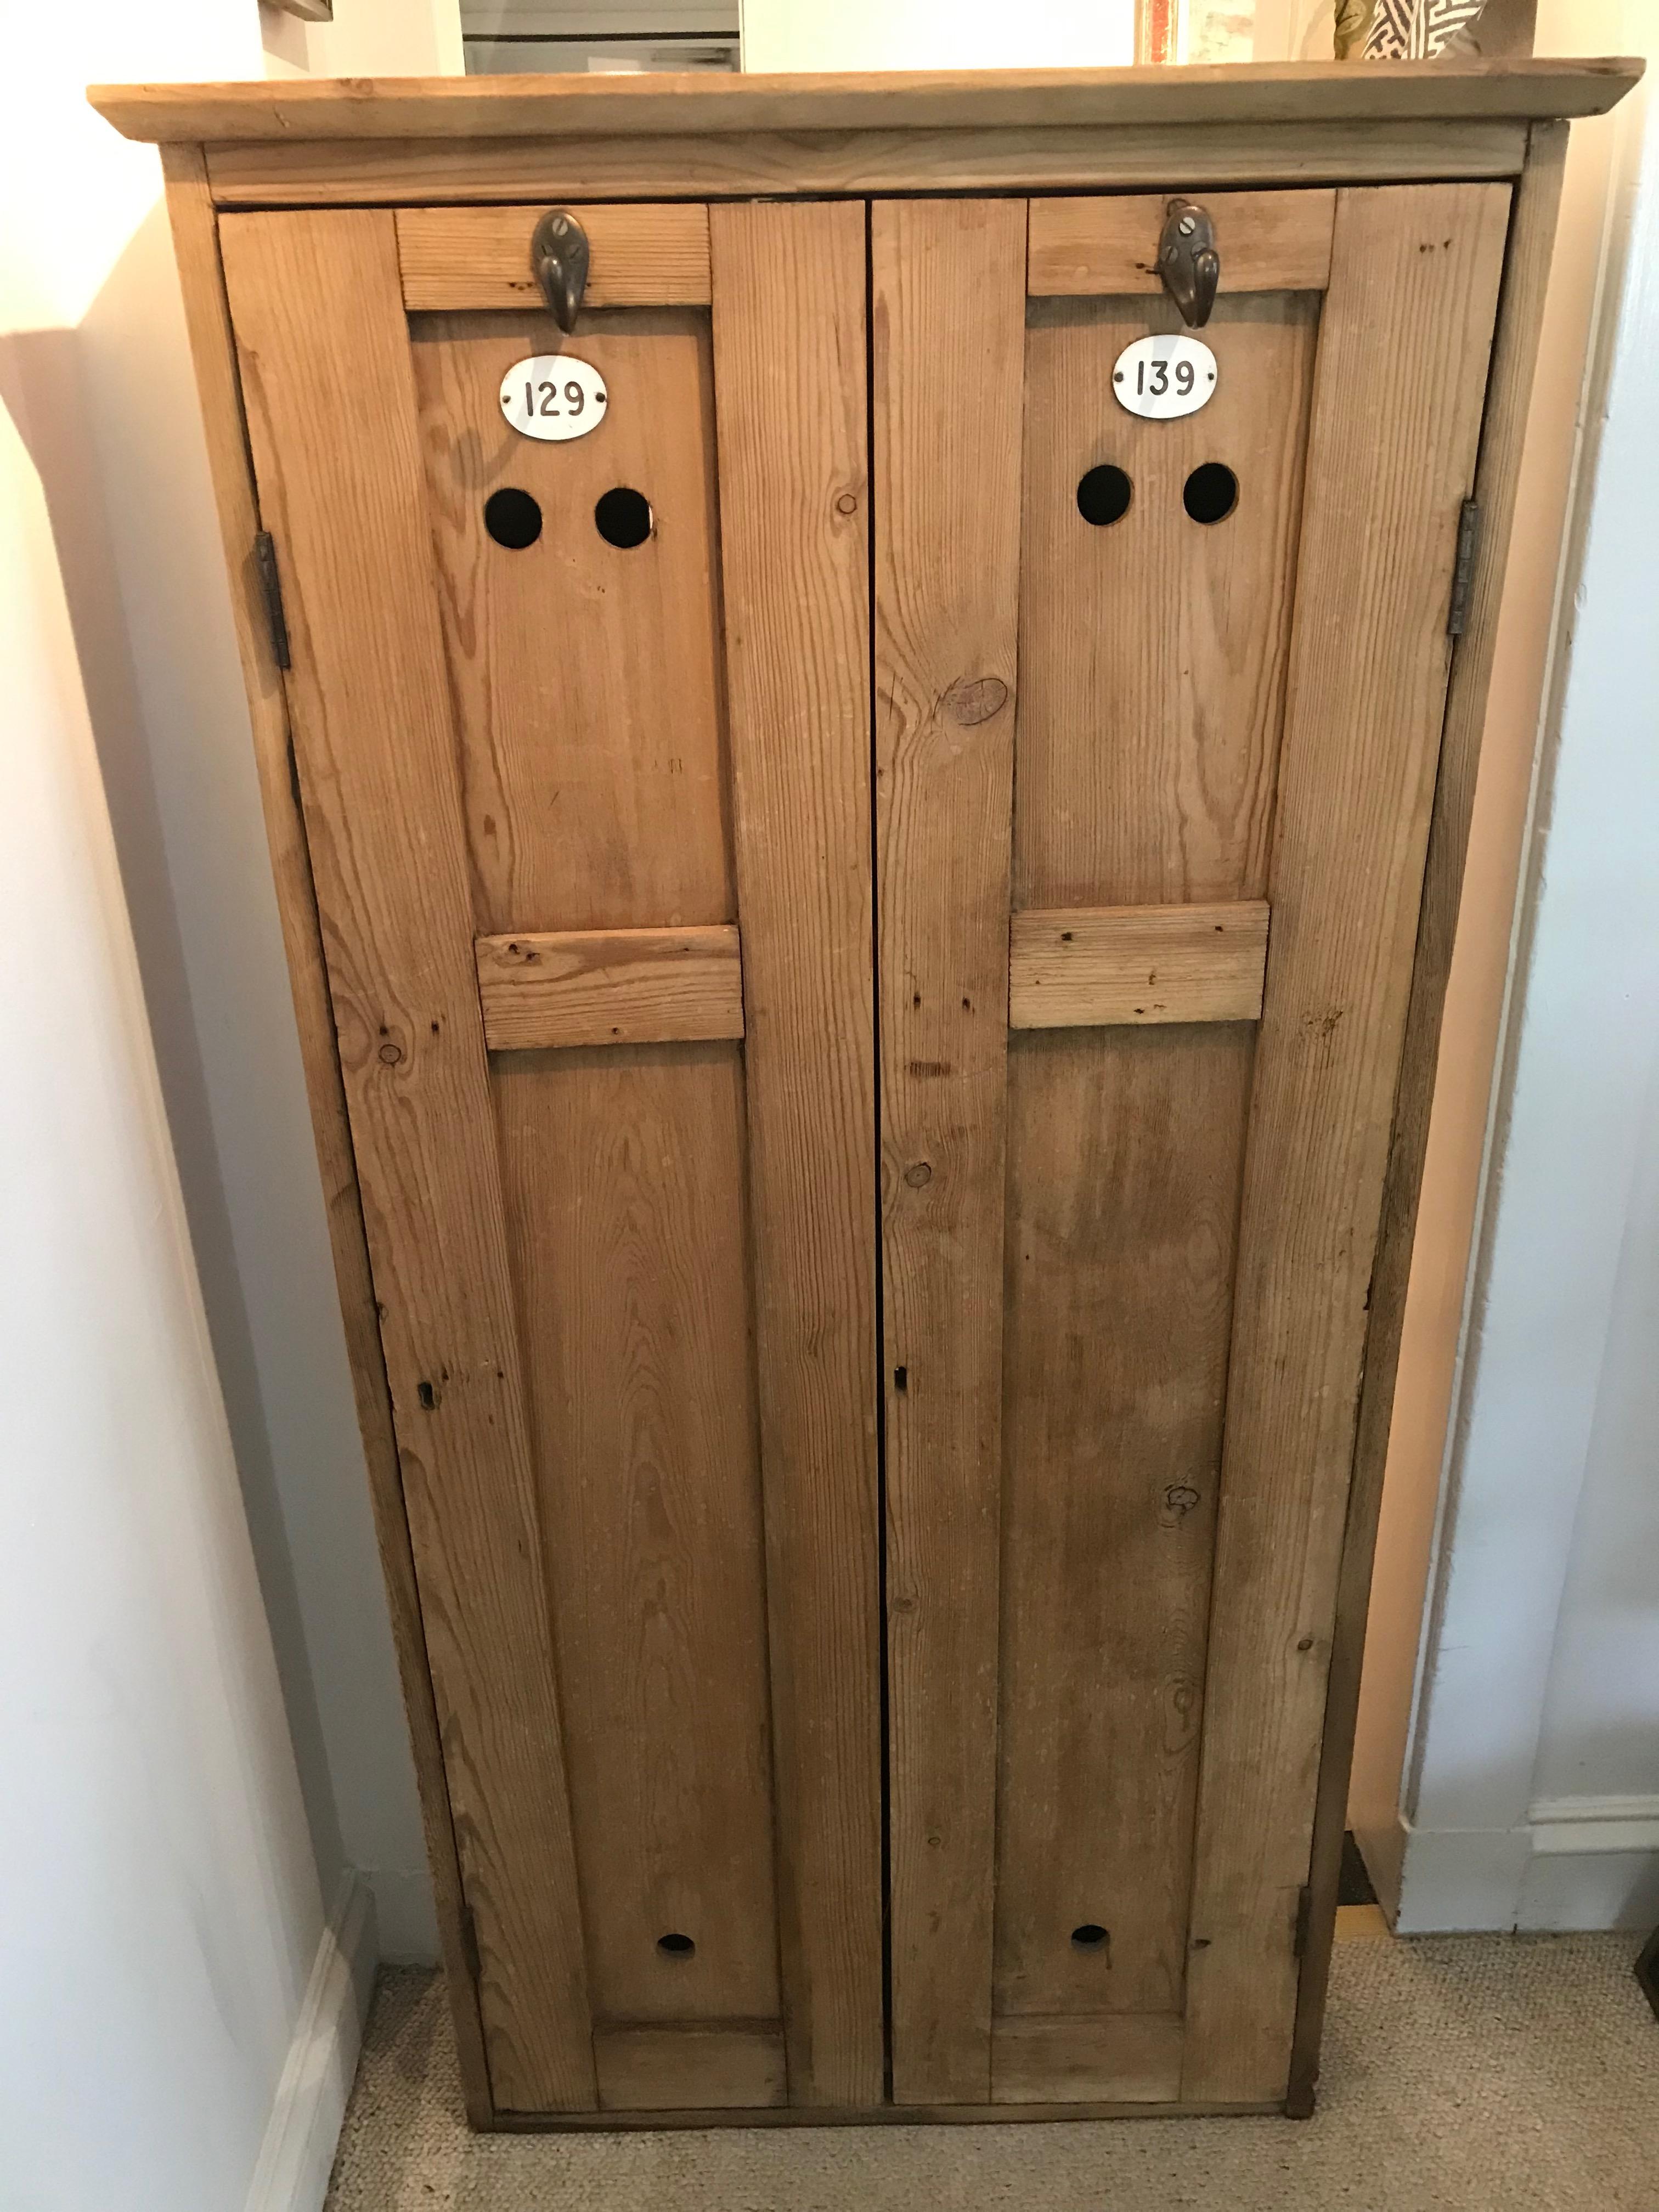 Early 20th Century Pine Lockers for Child’s Room, Mudroom, Hallway 4